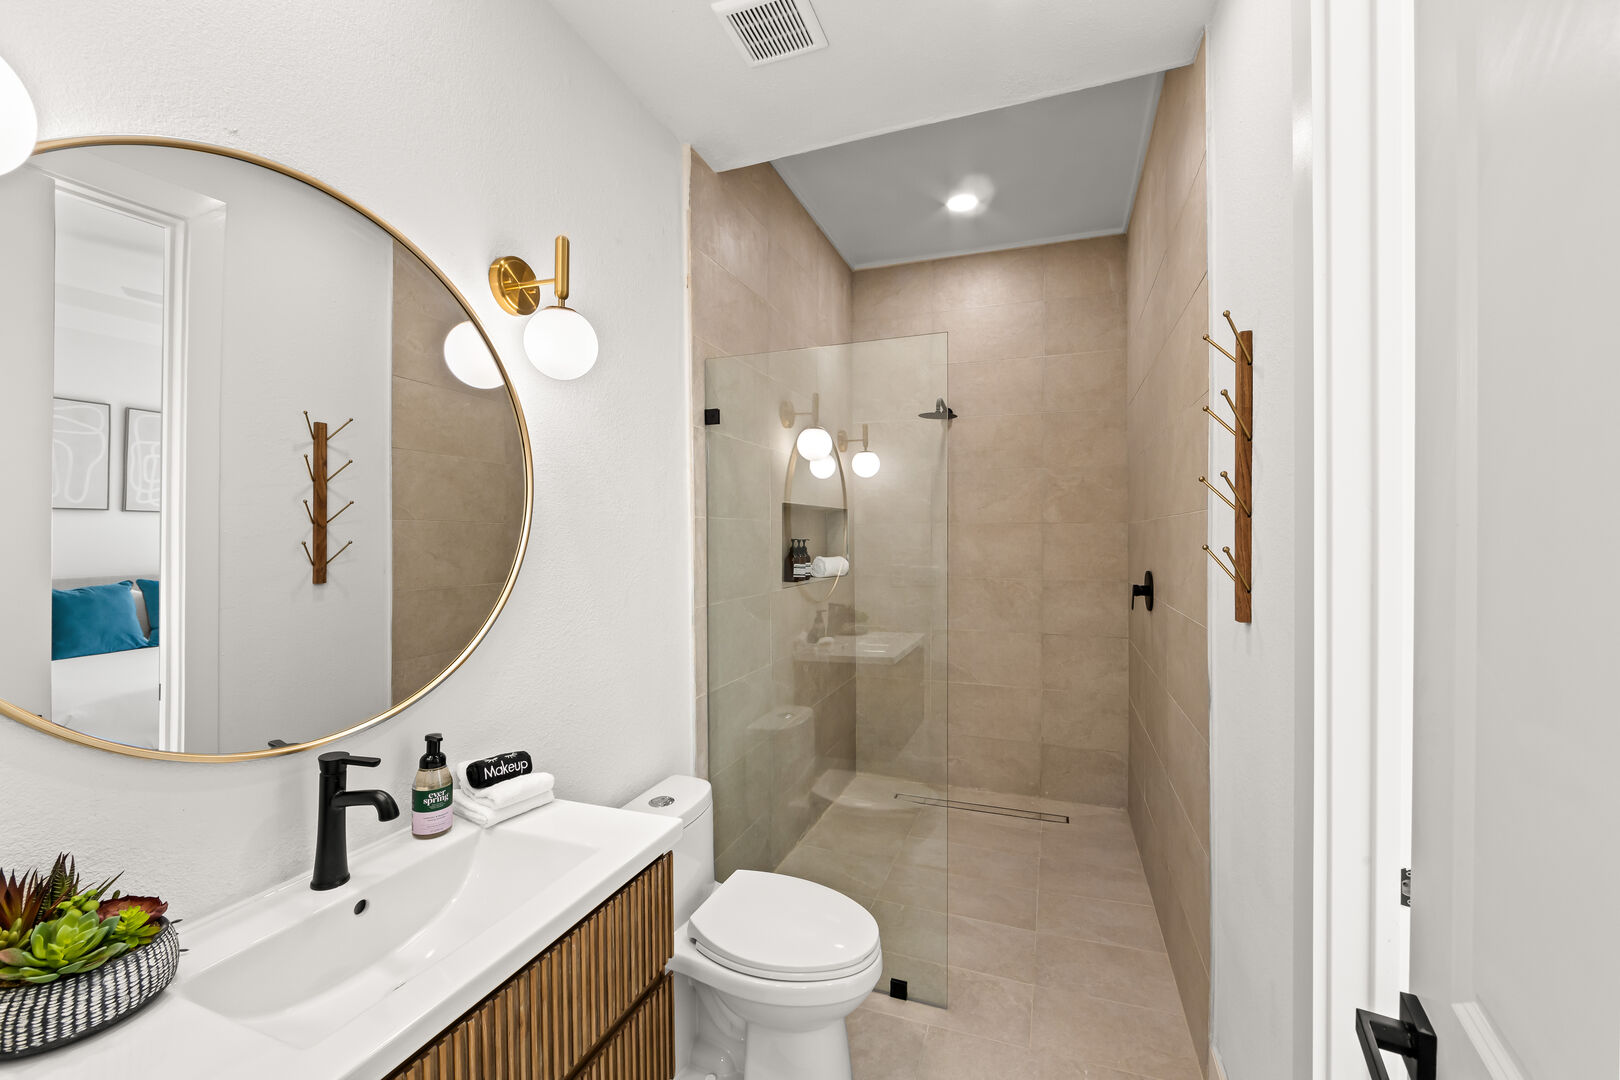 The private ensuite bathroom features two separate doors and may also be utilized as a powder room. This bathroom features a large walk-in tile shower with a decorative floating vanity sink.